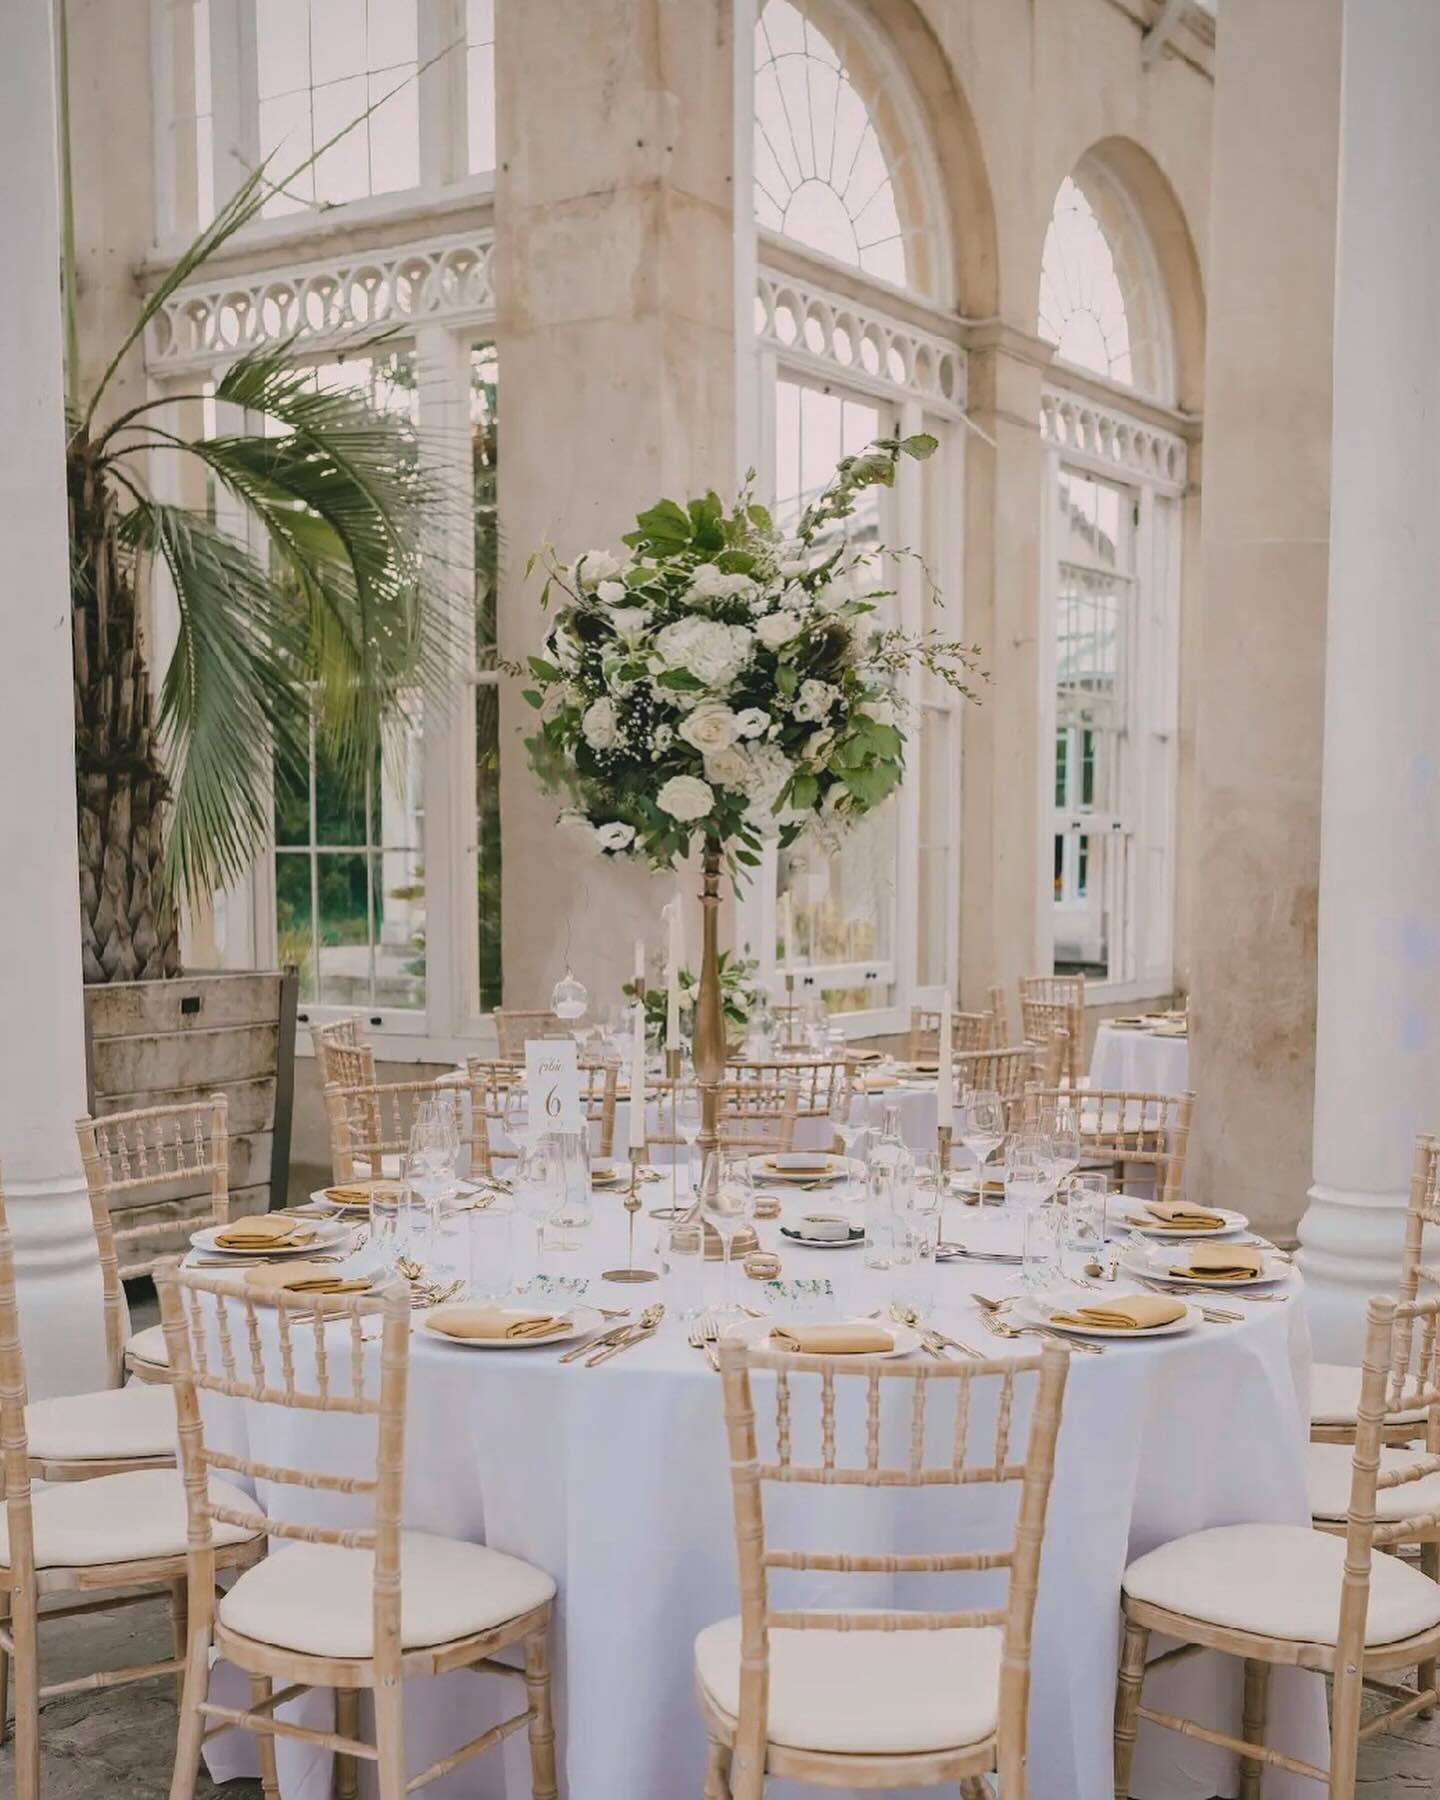 Syon Conservatory is an absolute favourite when we think of a special location in London. It&rsquo;s full of natural light and old palm trees, high glass ceilings and surrounded by beautiful, well kept gardens. When you get there you&rsquo;re enterin